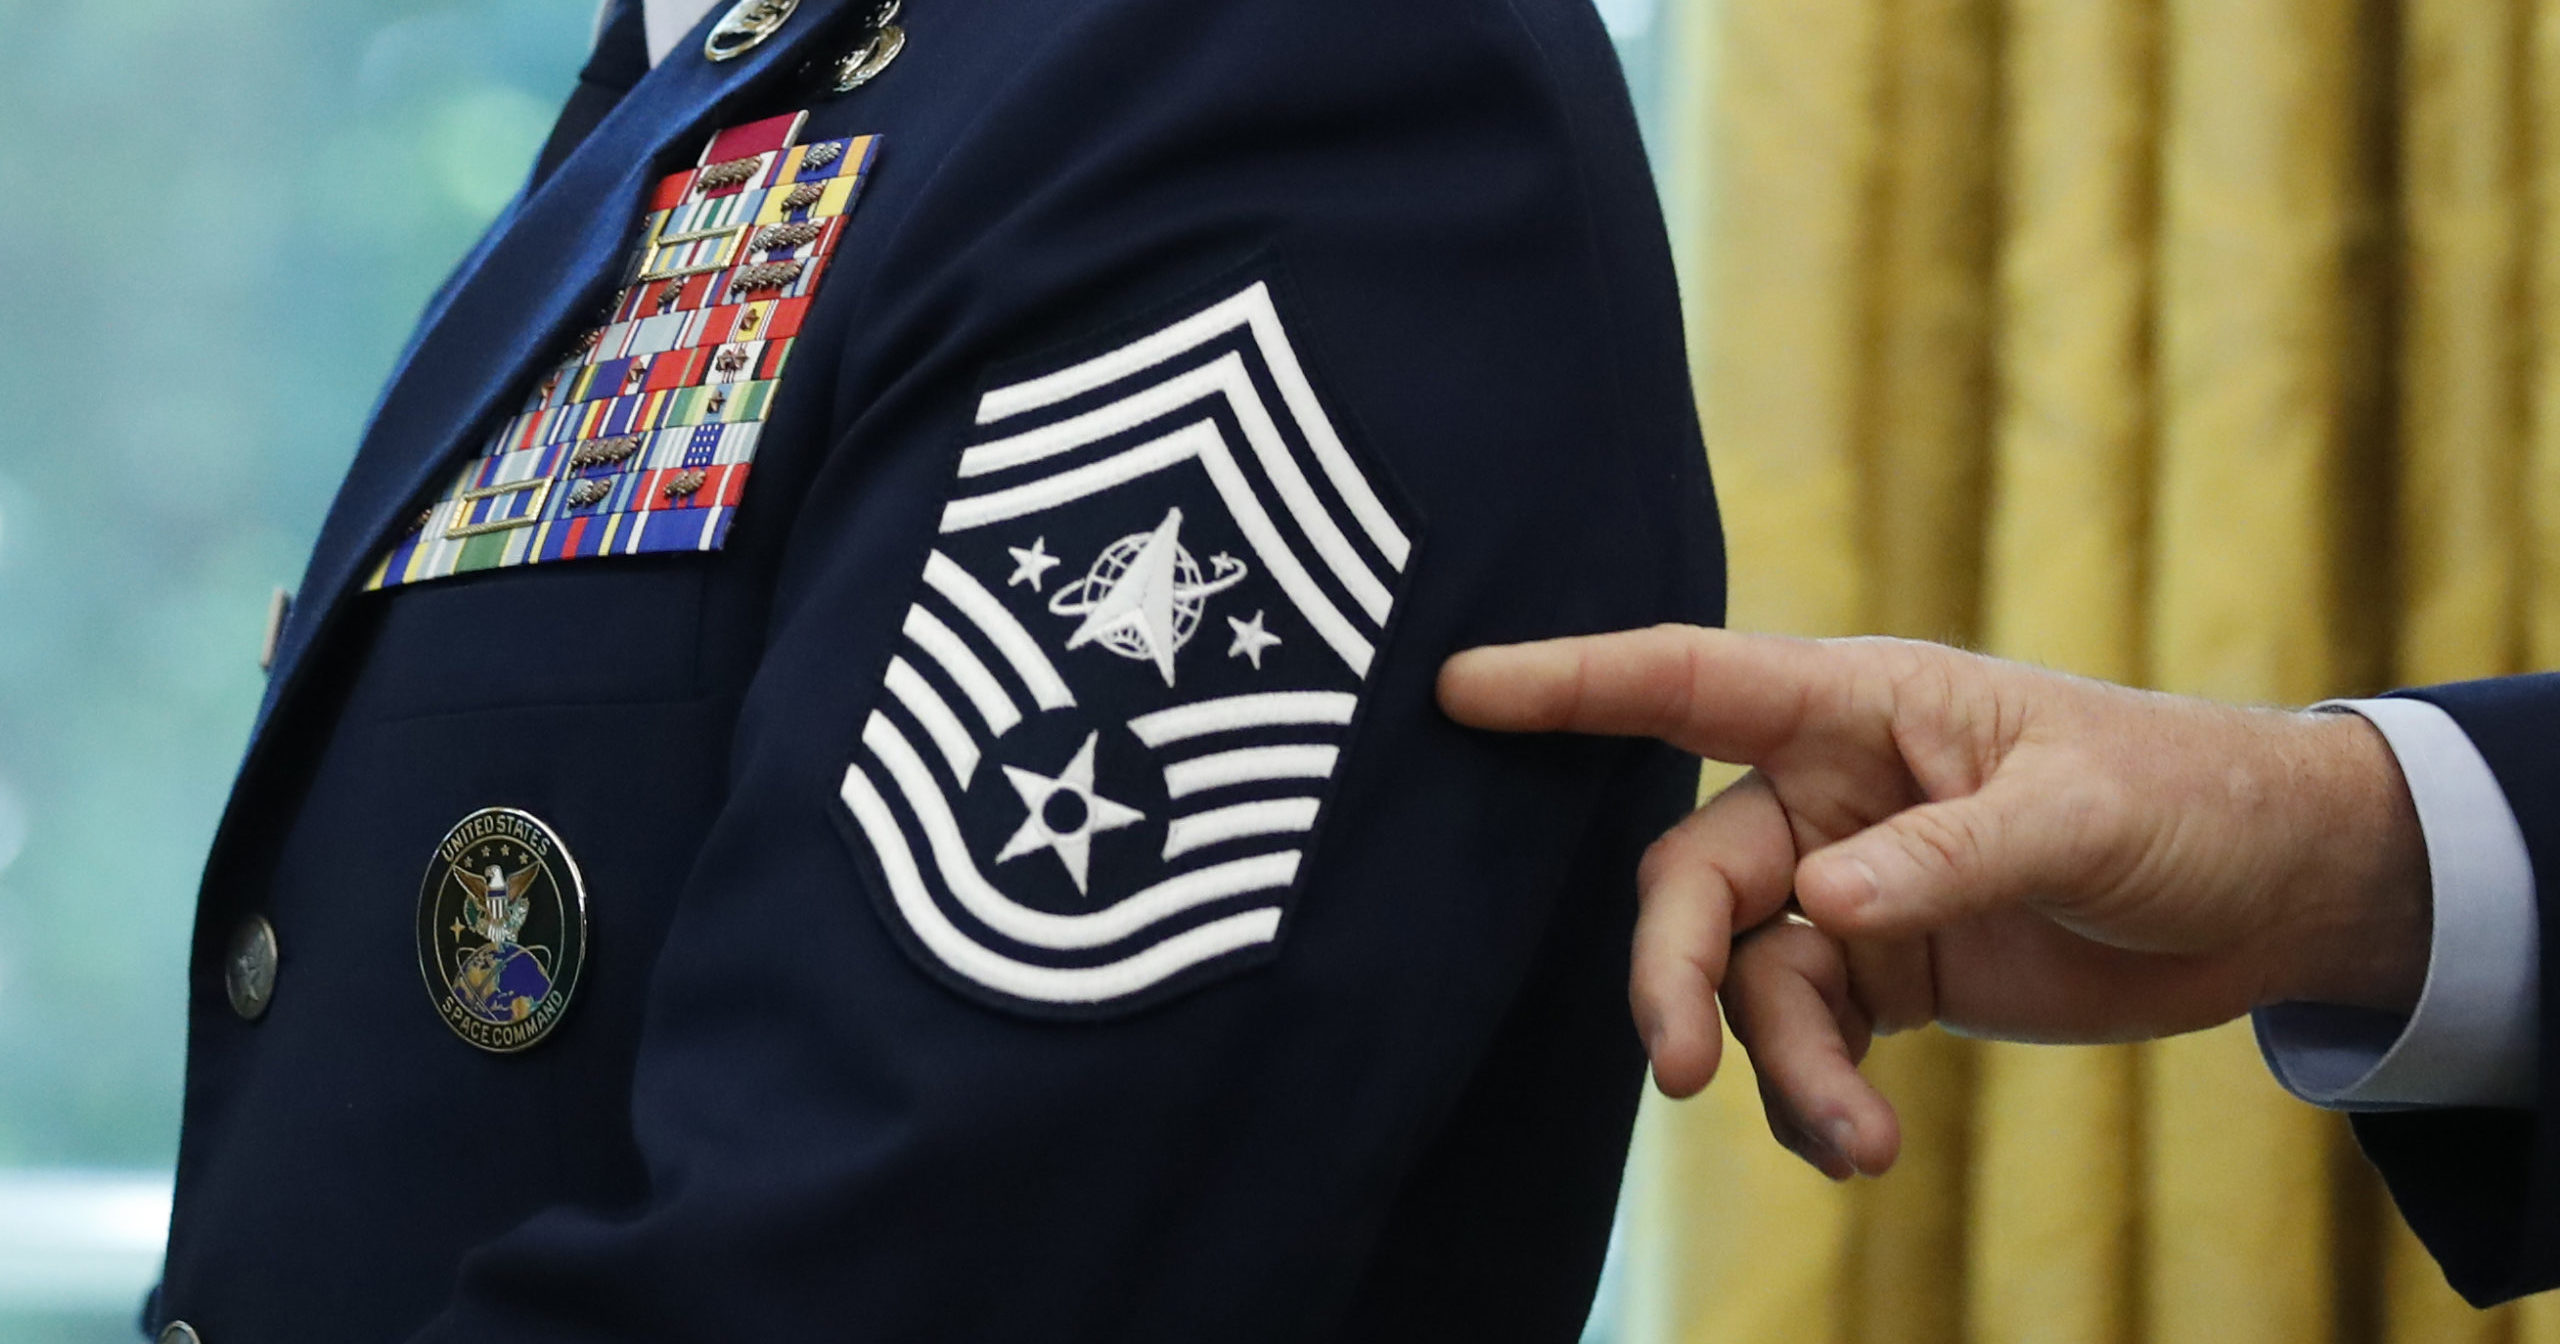 Chief Master Sgt. Roger Towberman displays his insignia during a presentation of the United States Space Force flag in the Oval Office of the White House in Washington, D.C., on May 15, 2020.